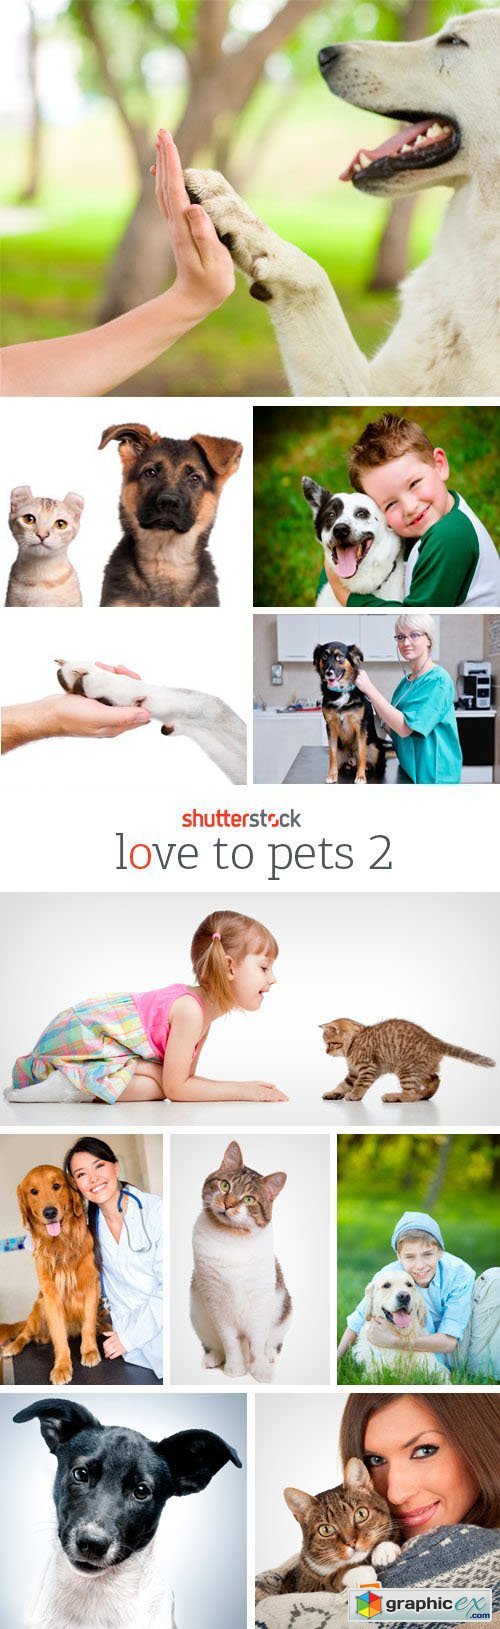 Amazing SS - Love To Pets 2, 25xJPG